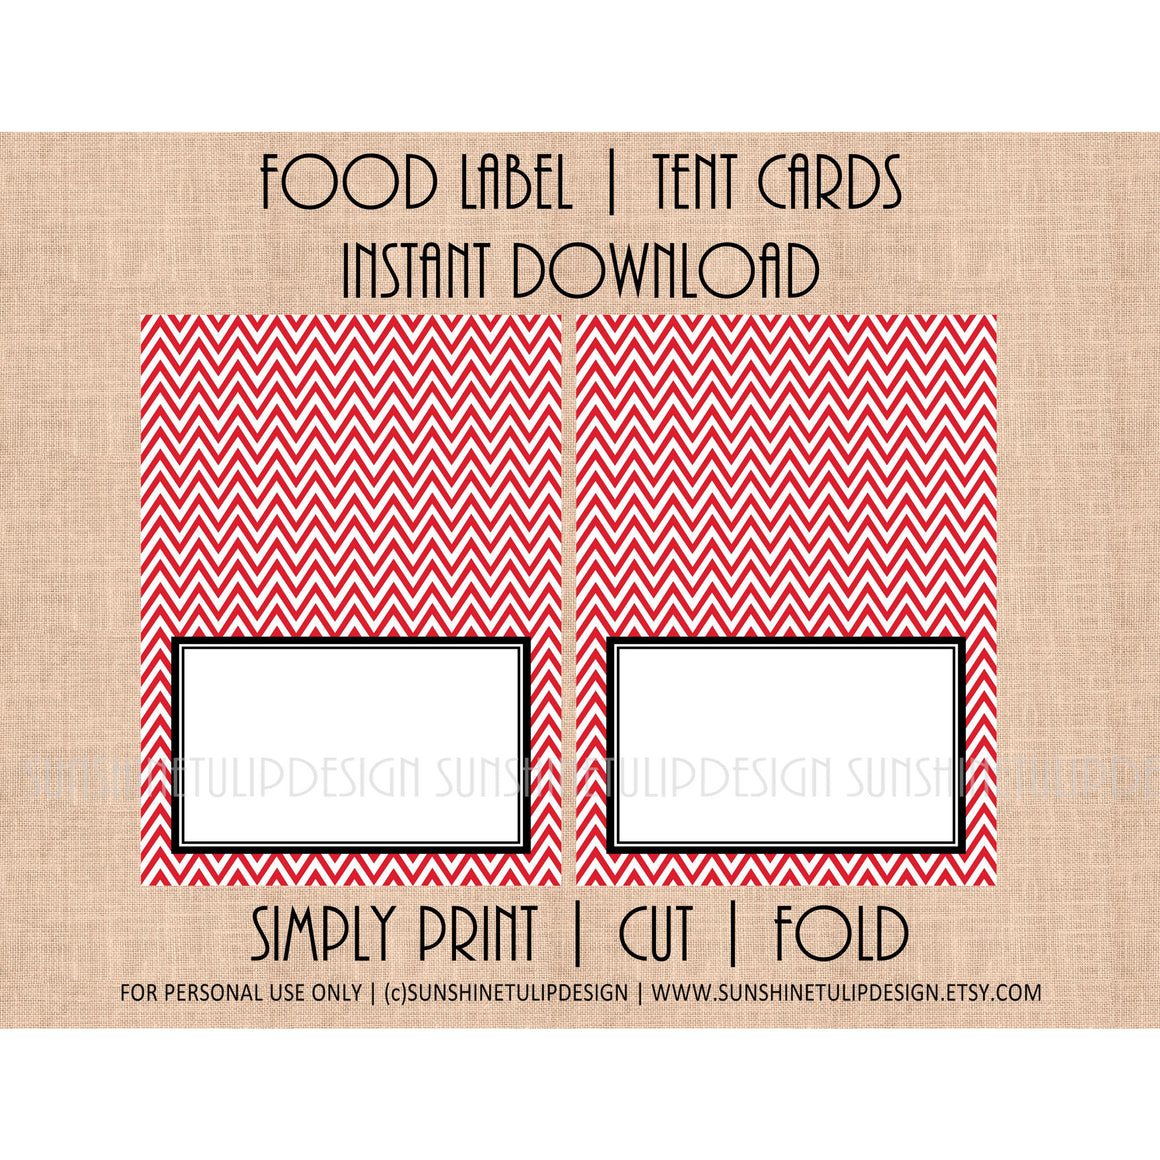 Printable Food Label Tent Cards Red & White Chevron All Occasion by SUNSHINETULIPDESIGN - Sunshinetulipdesign